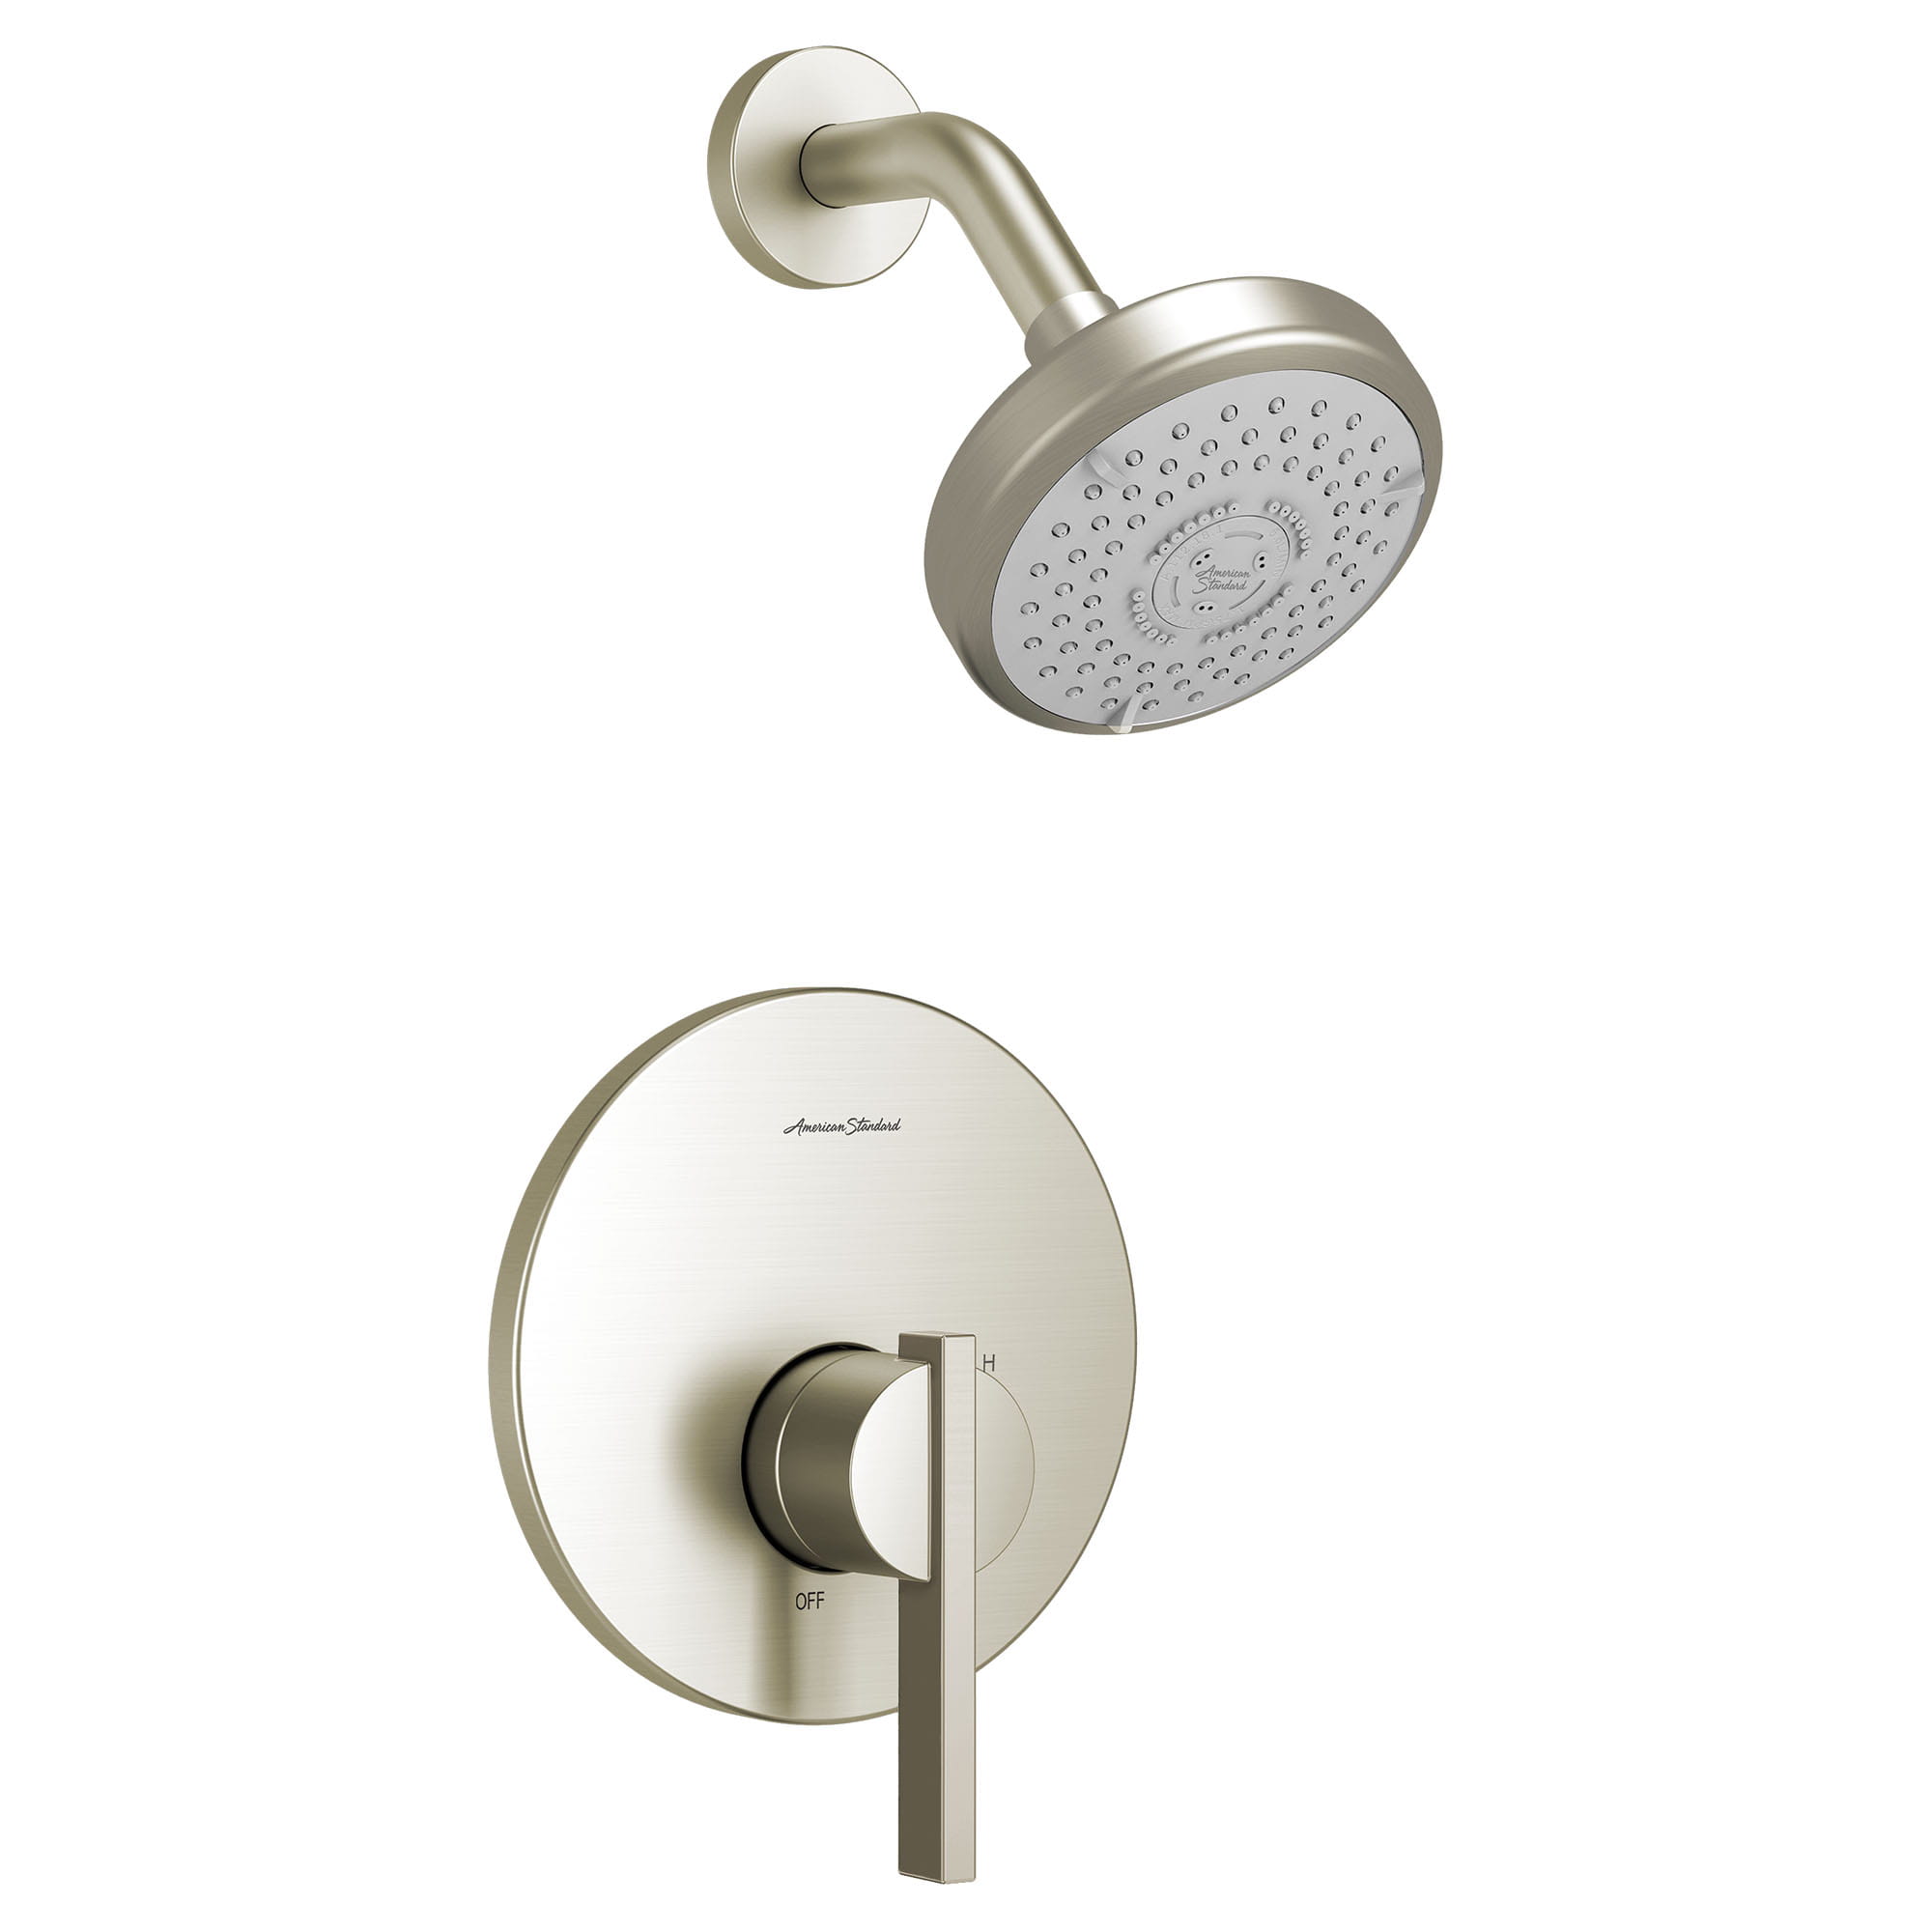 Berwick 175 gpm 66 L min Shower Trim Kit With 3 Function Showerhead Double Ceramic Pressure Balance Cartridge and Lever Handle   BRUSHED NICKEL